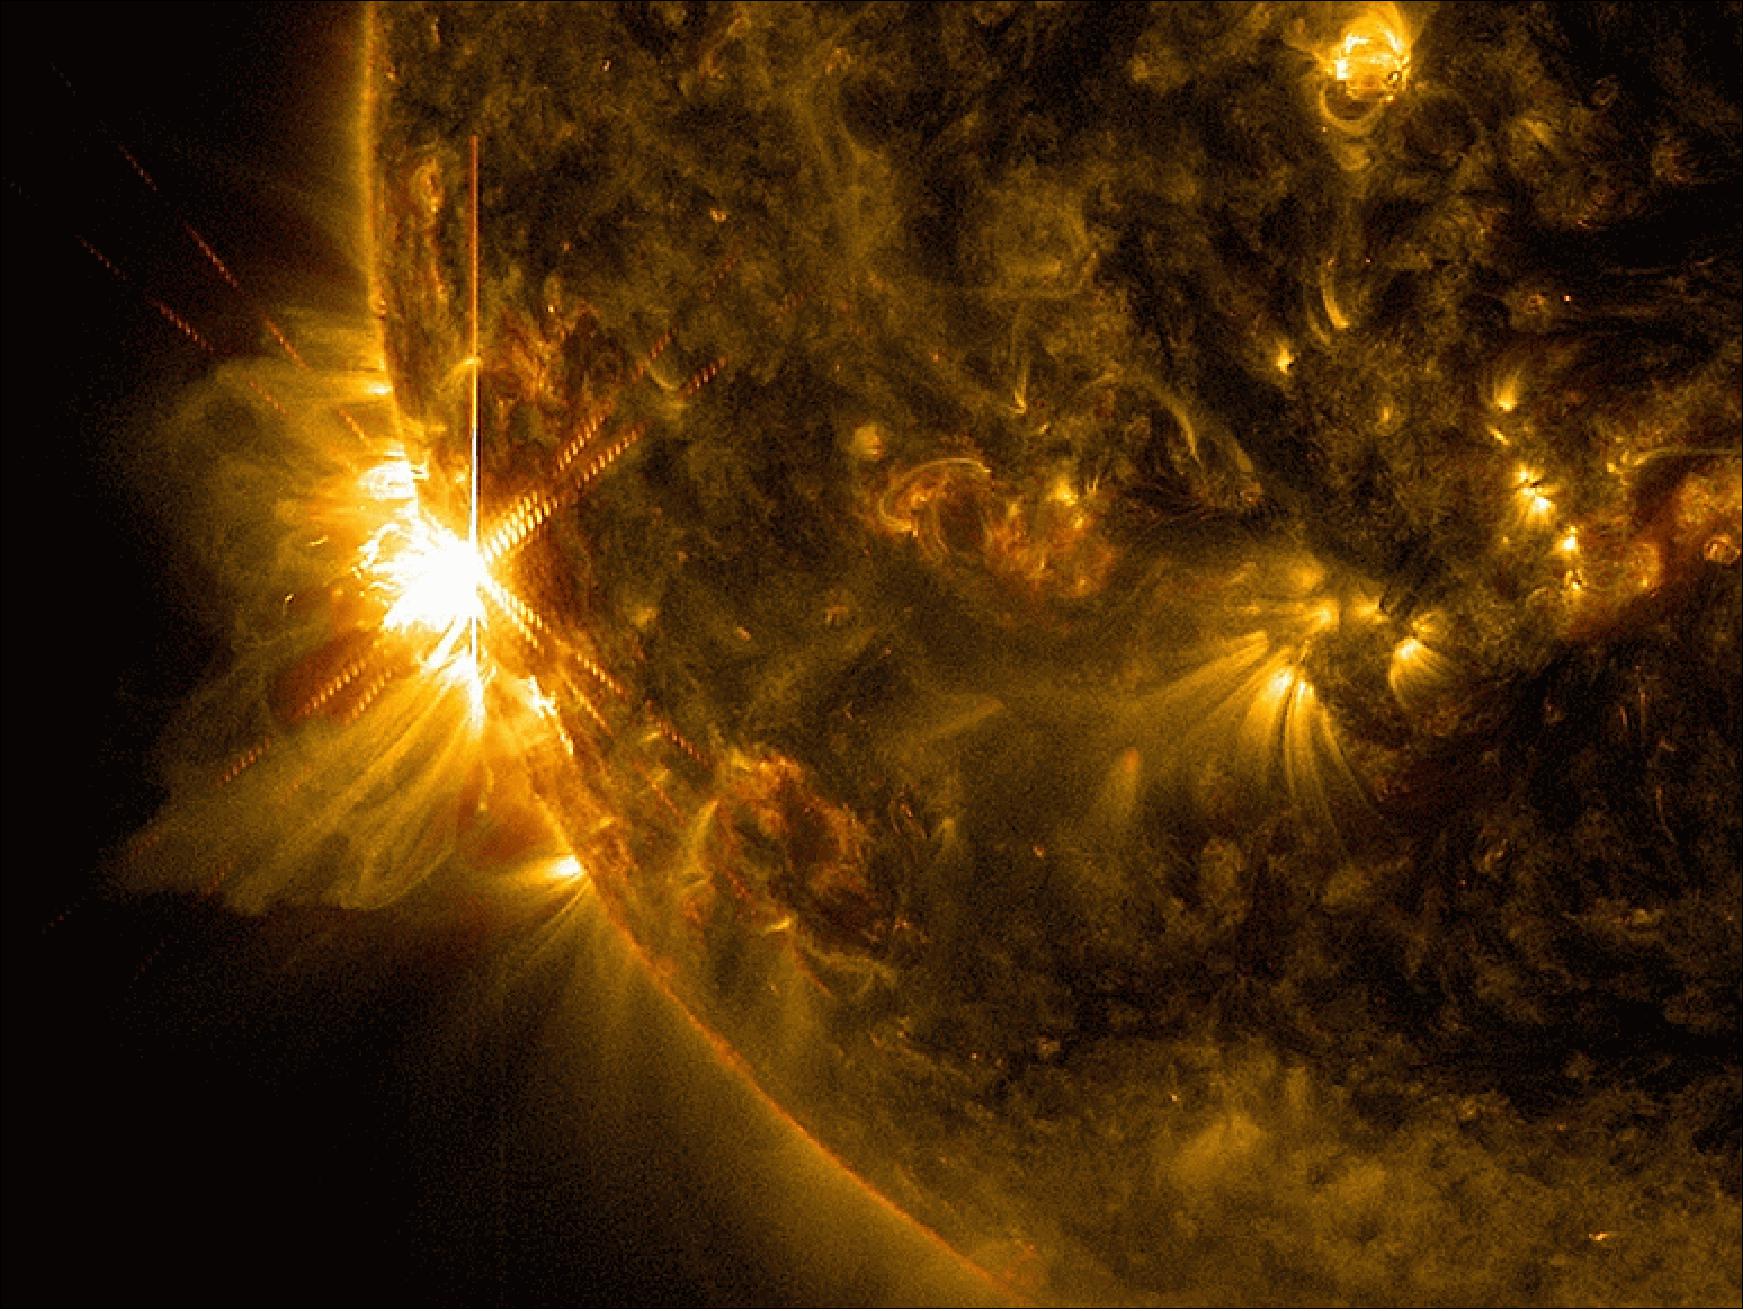 Figure 22: A solar flare bursts off the left limb of the sun in this image captured by SDO on June 10, 2014, at 11.42 UTC. This is classified as an X 2.2 flare, shown in a blend of two wavelengths of light: 171 and 131 Ä, colorized in gold and red, respectively (image credit: NASA, SDO)